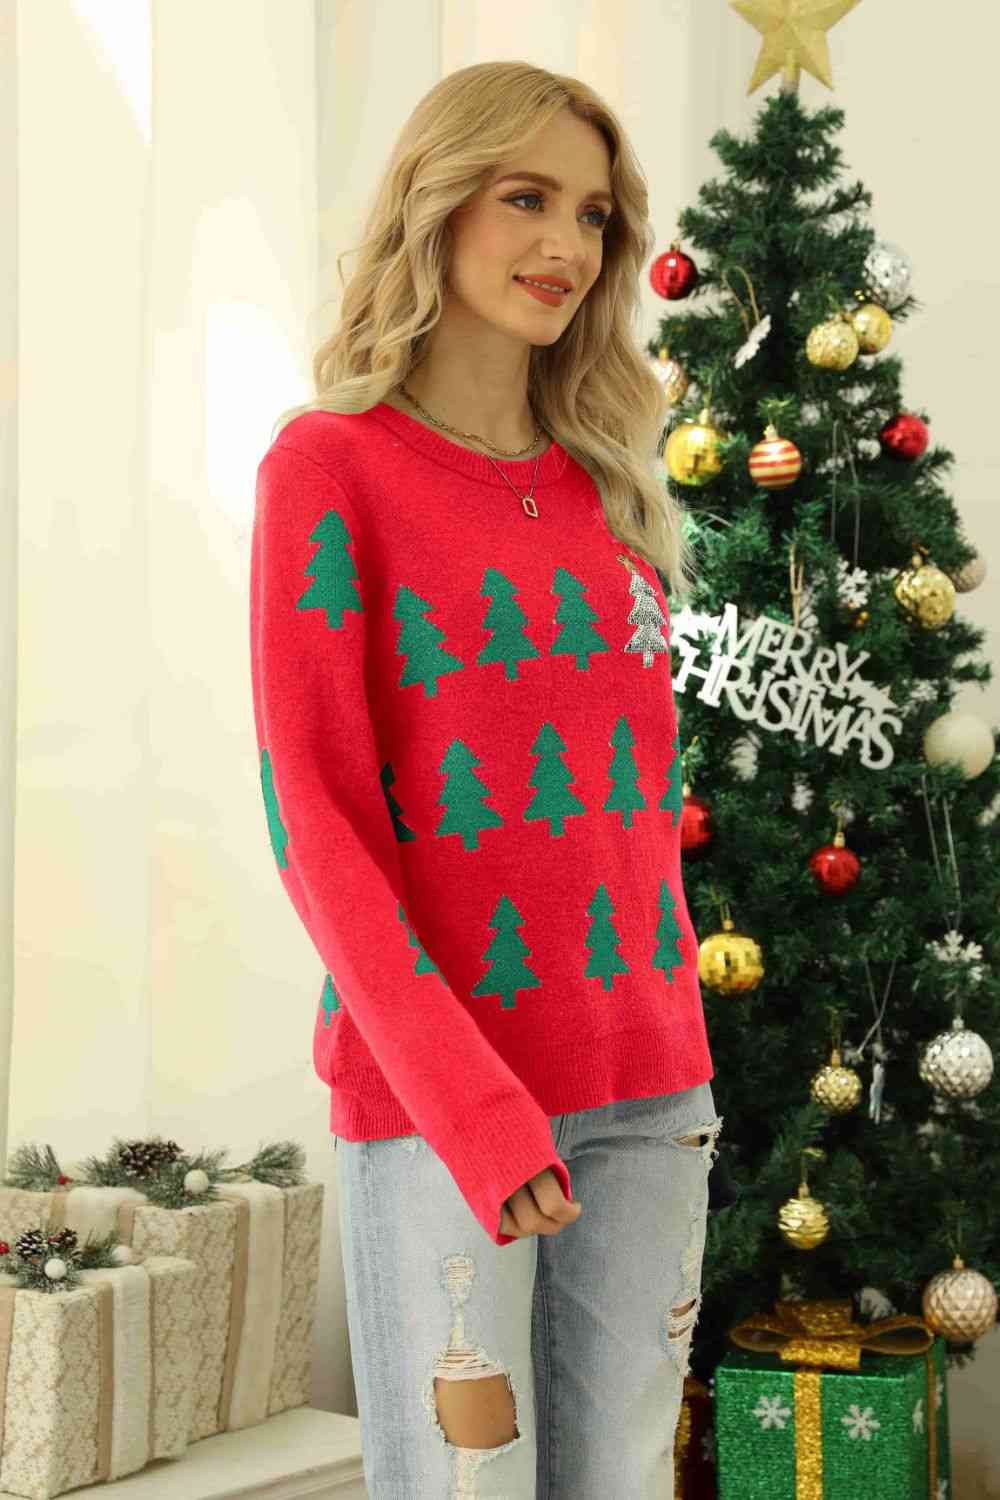 Christmas Tree Round Neck Ribbed Trim Sweater - Kawaii Stop - Casual, Christmas, Christmas Outfit, Christmas Tree Design, Comfortable, Cozy Winter Clothing, Fashion, Festive Attire, Festive Wear, Gift Idea, Holiday Fashion, Seasonal Wardrobe, Ship From Overseas, Stylish Apparel, Trendy, Unique Design, Winter Style, Yh